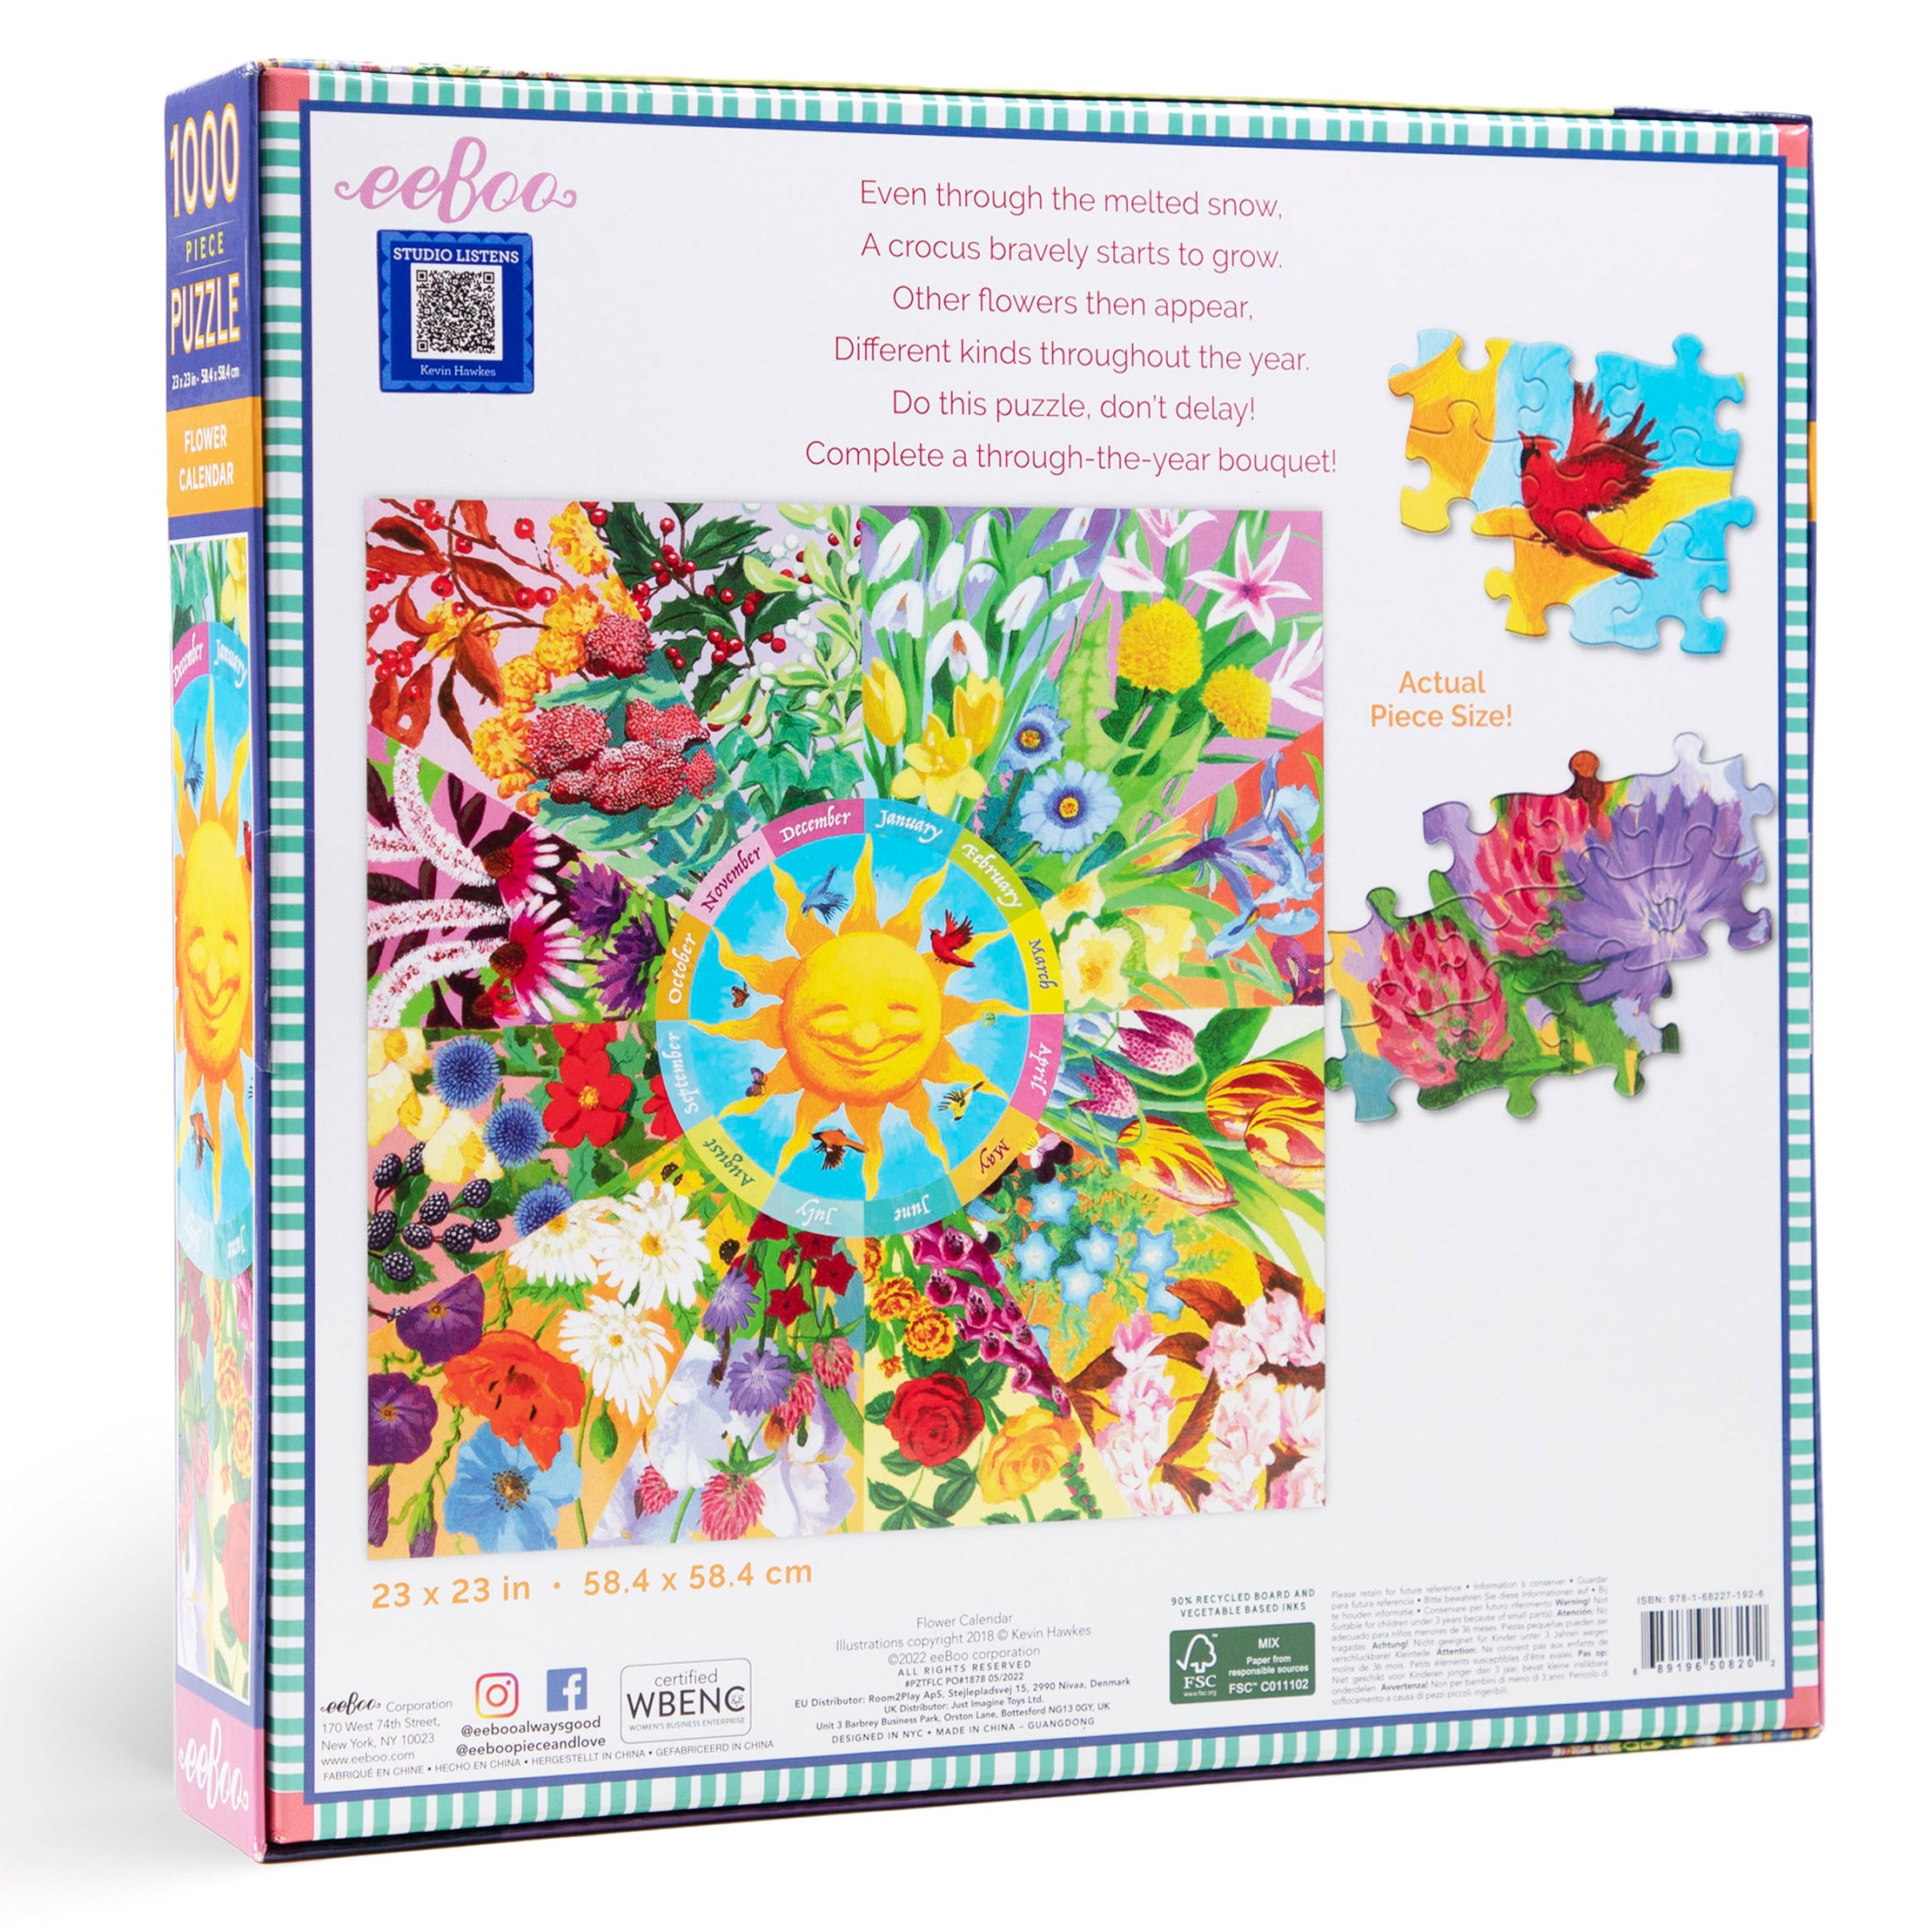 Flower Calendar 1000 Piece Square Jigsaw Puzzle eeBoo Gifts for Adults